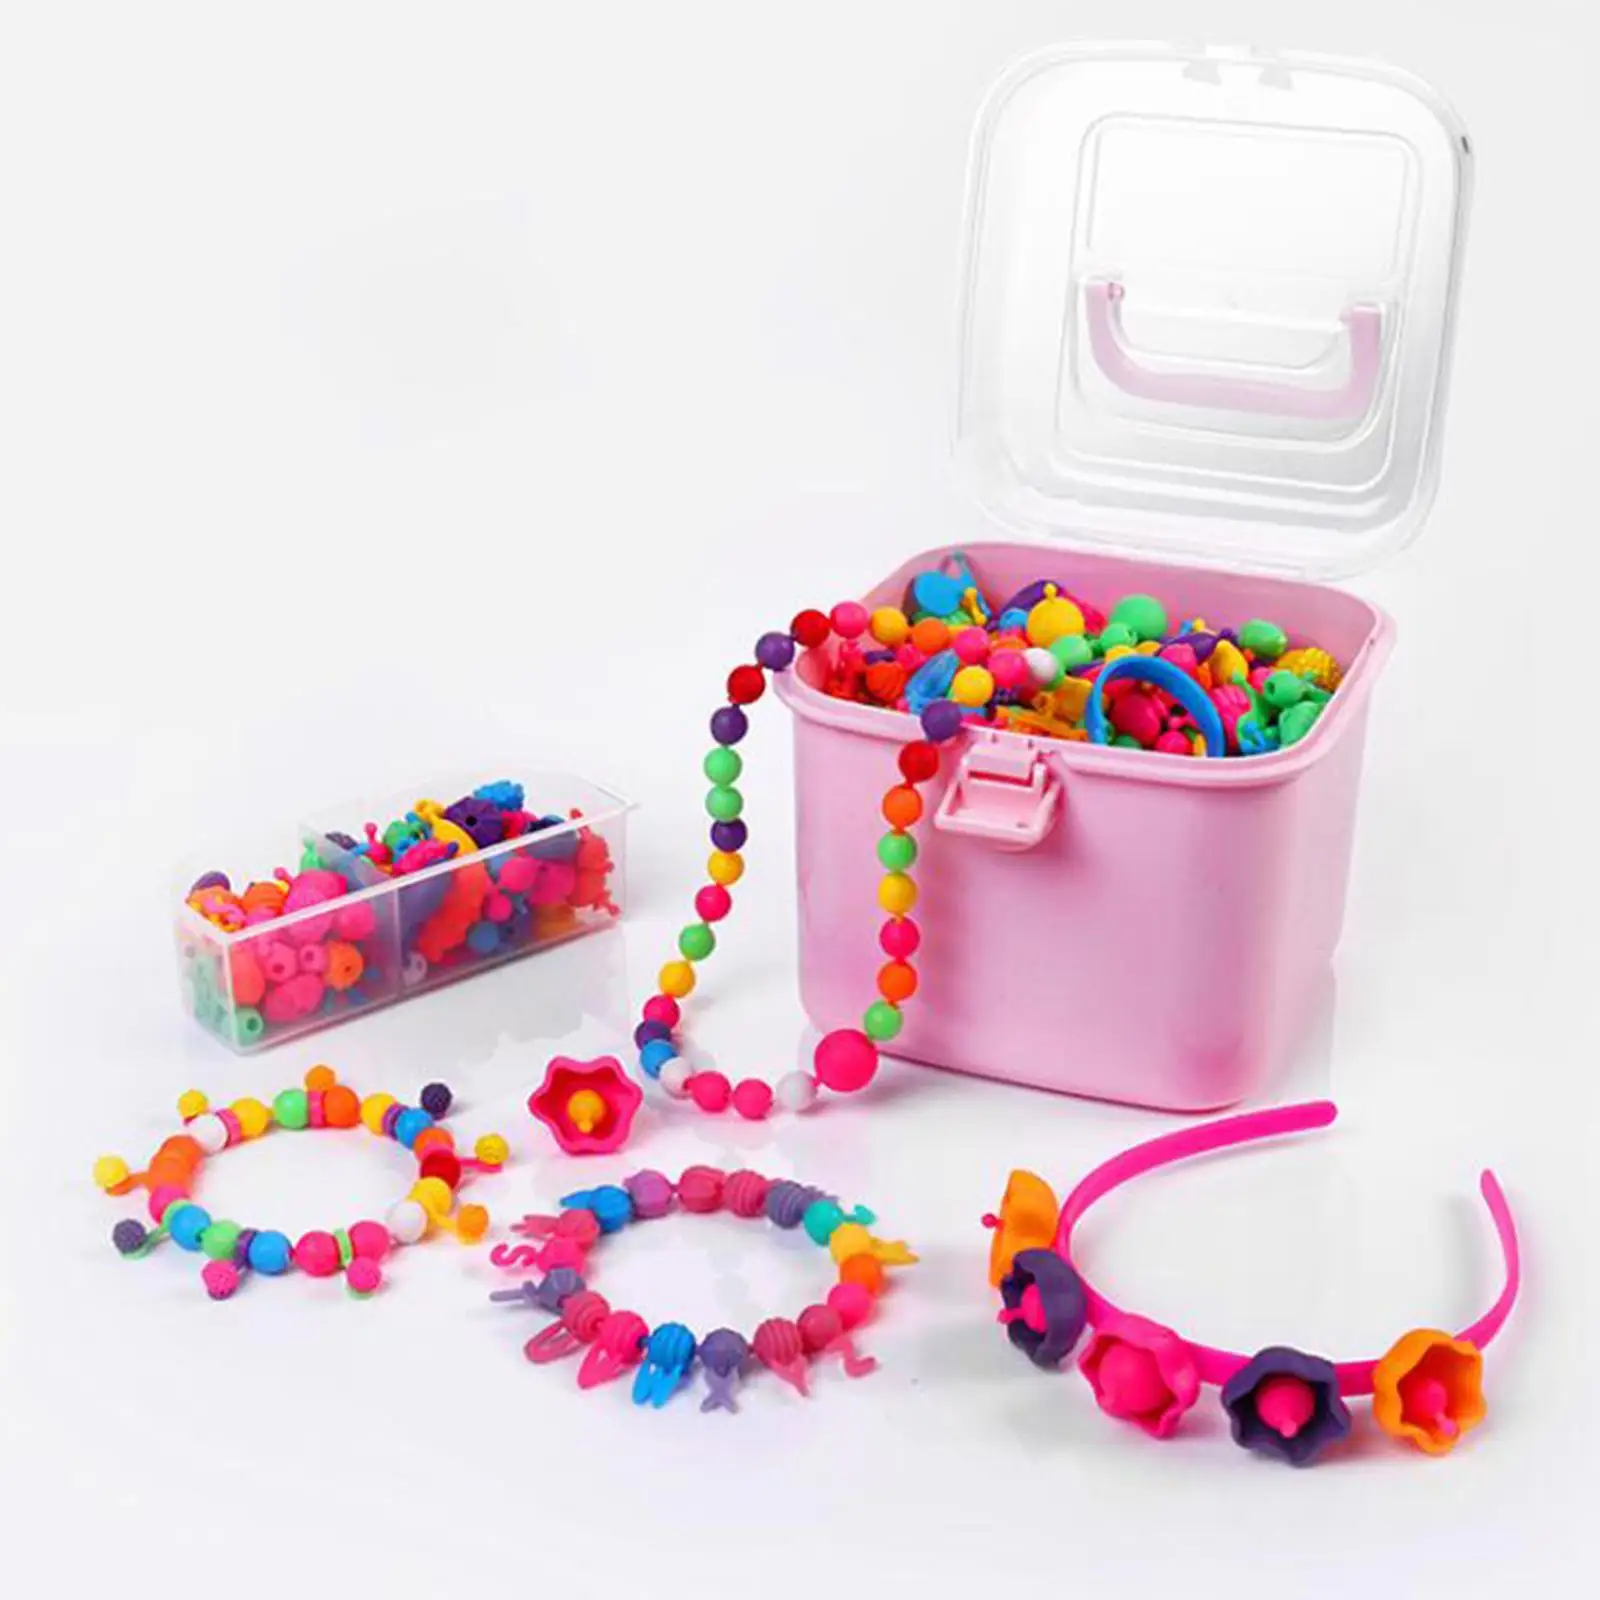 550x Snap Bead Creative DIY Jewelry Set Toys Jewelry Making Kit for Hairband